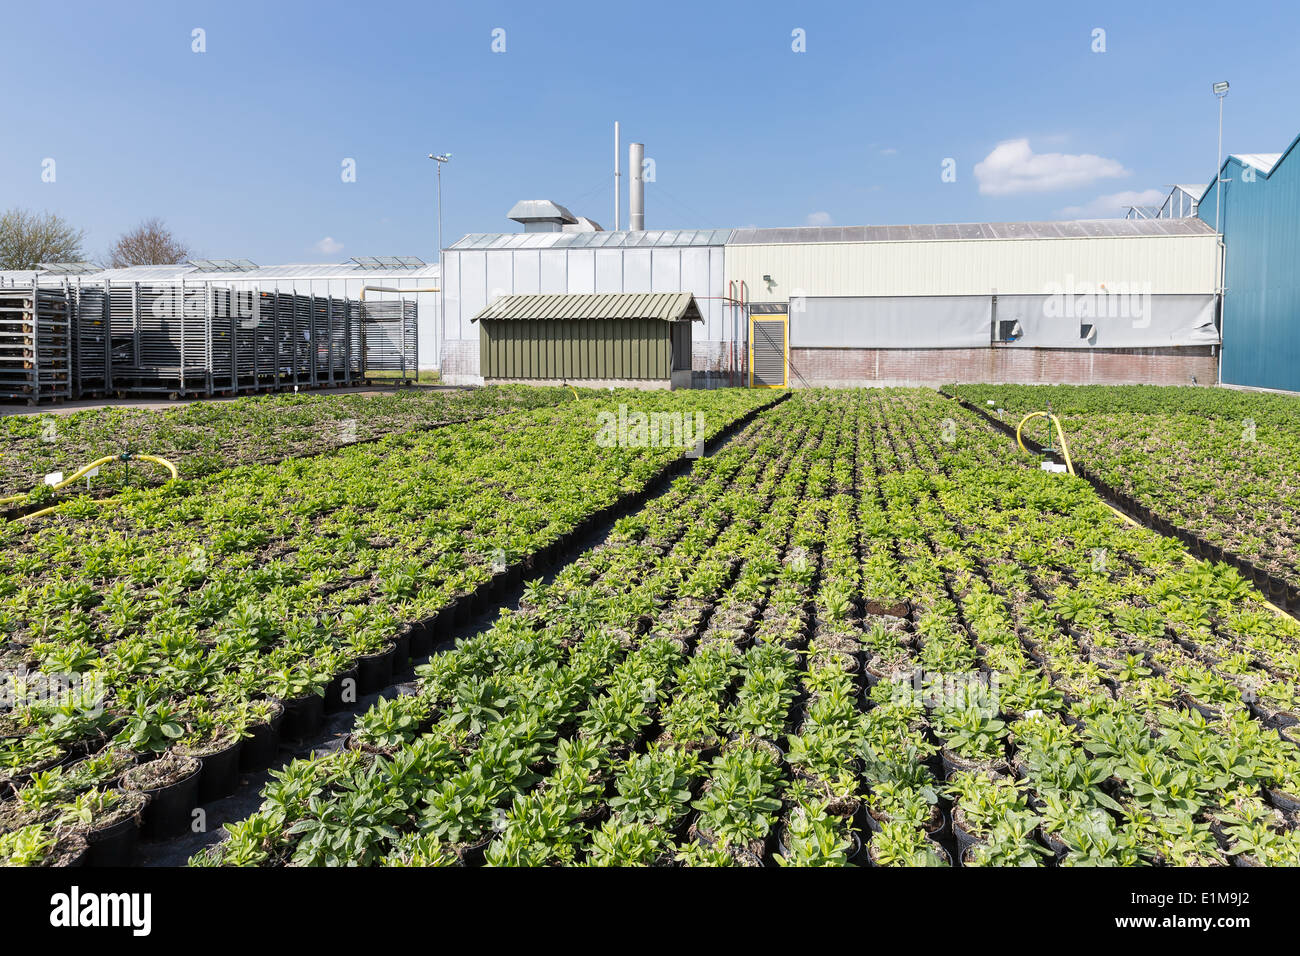 Dutch greenhouse with outdoor cultivation of plants Stock Photo